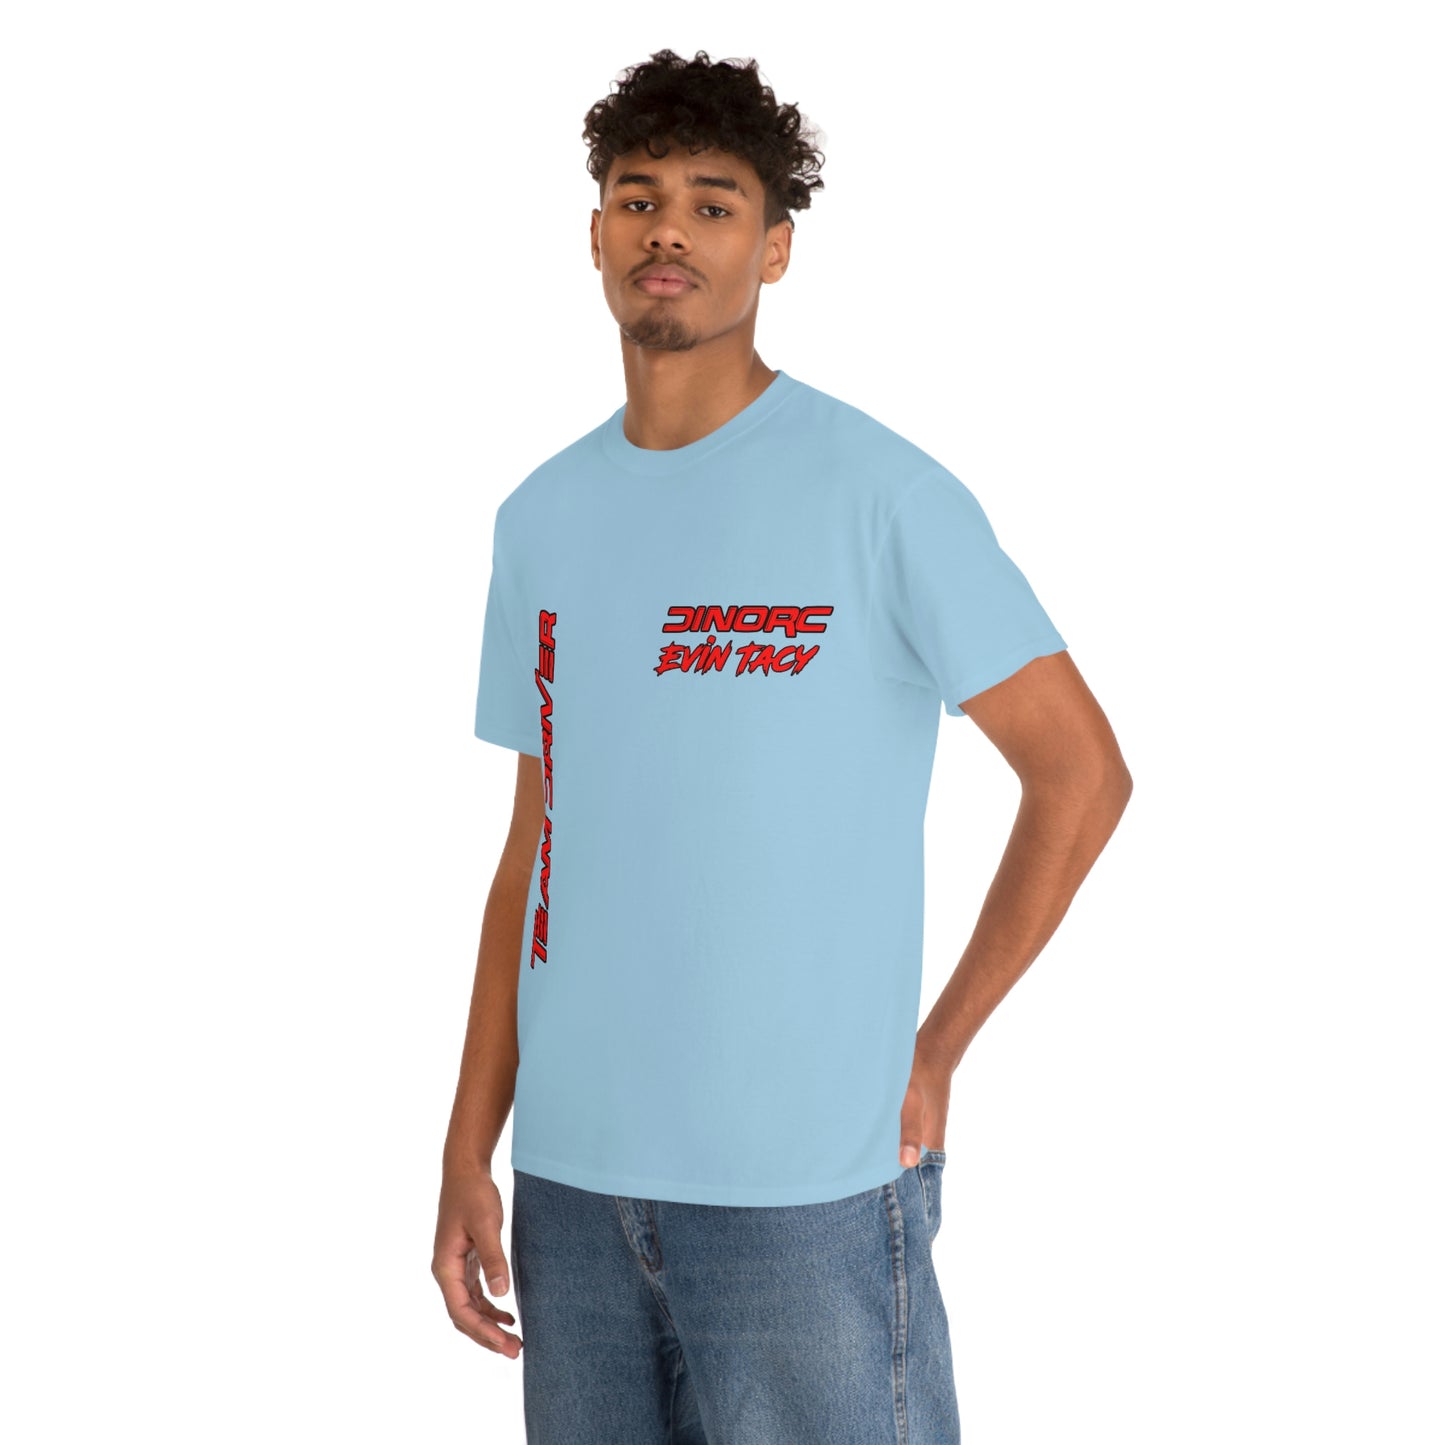 Team Driver Evin Tacy Front and Back DinoRc Logo T-Shirt S-5x 5 colors